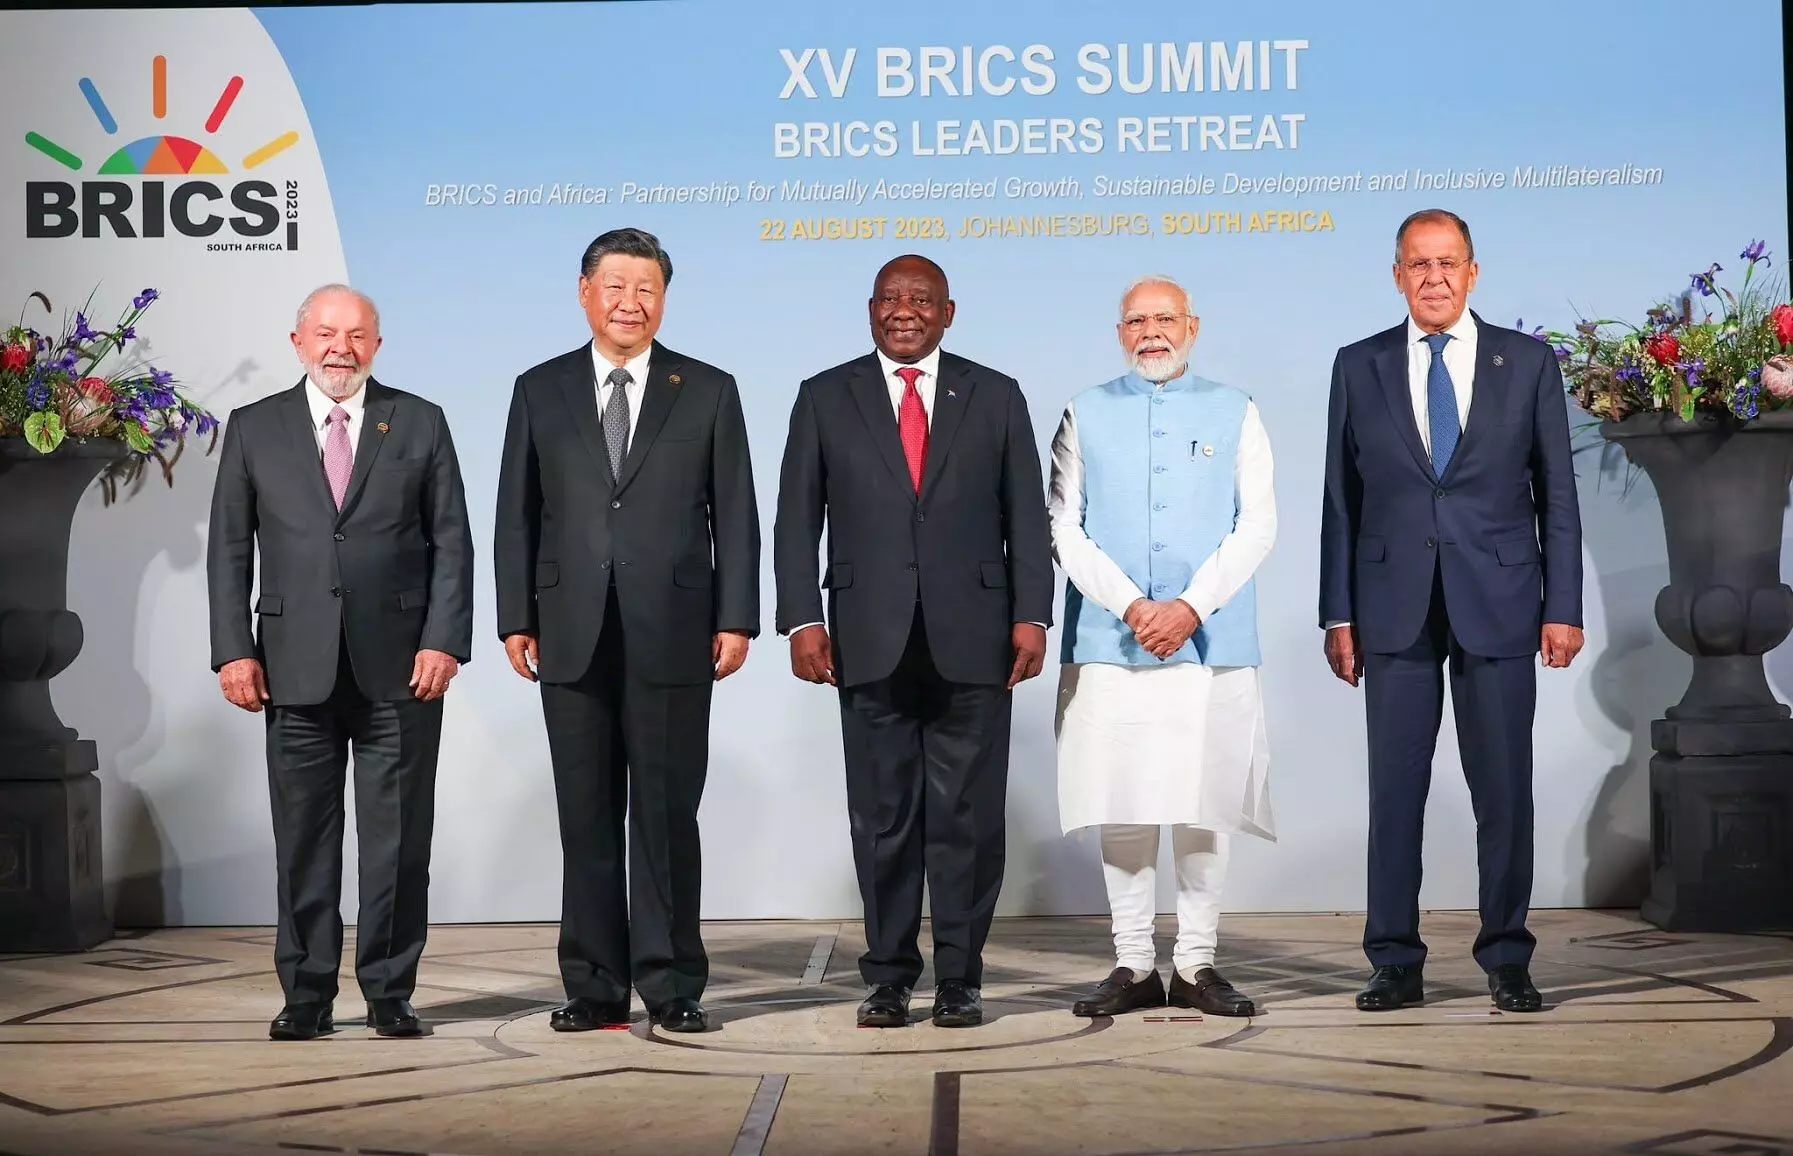 PM Modi travels to South Africa for BRICS Leaders Retreat